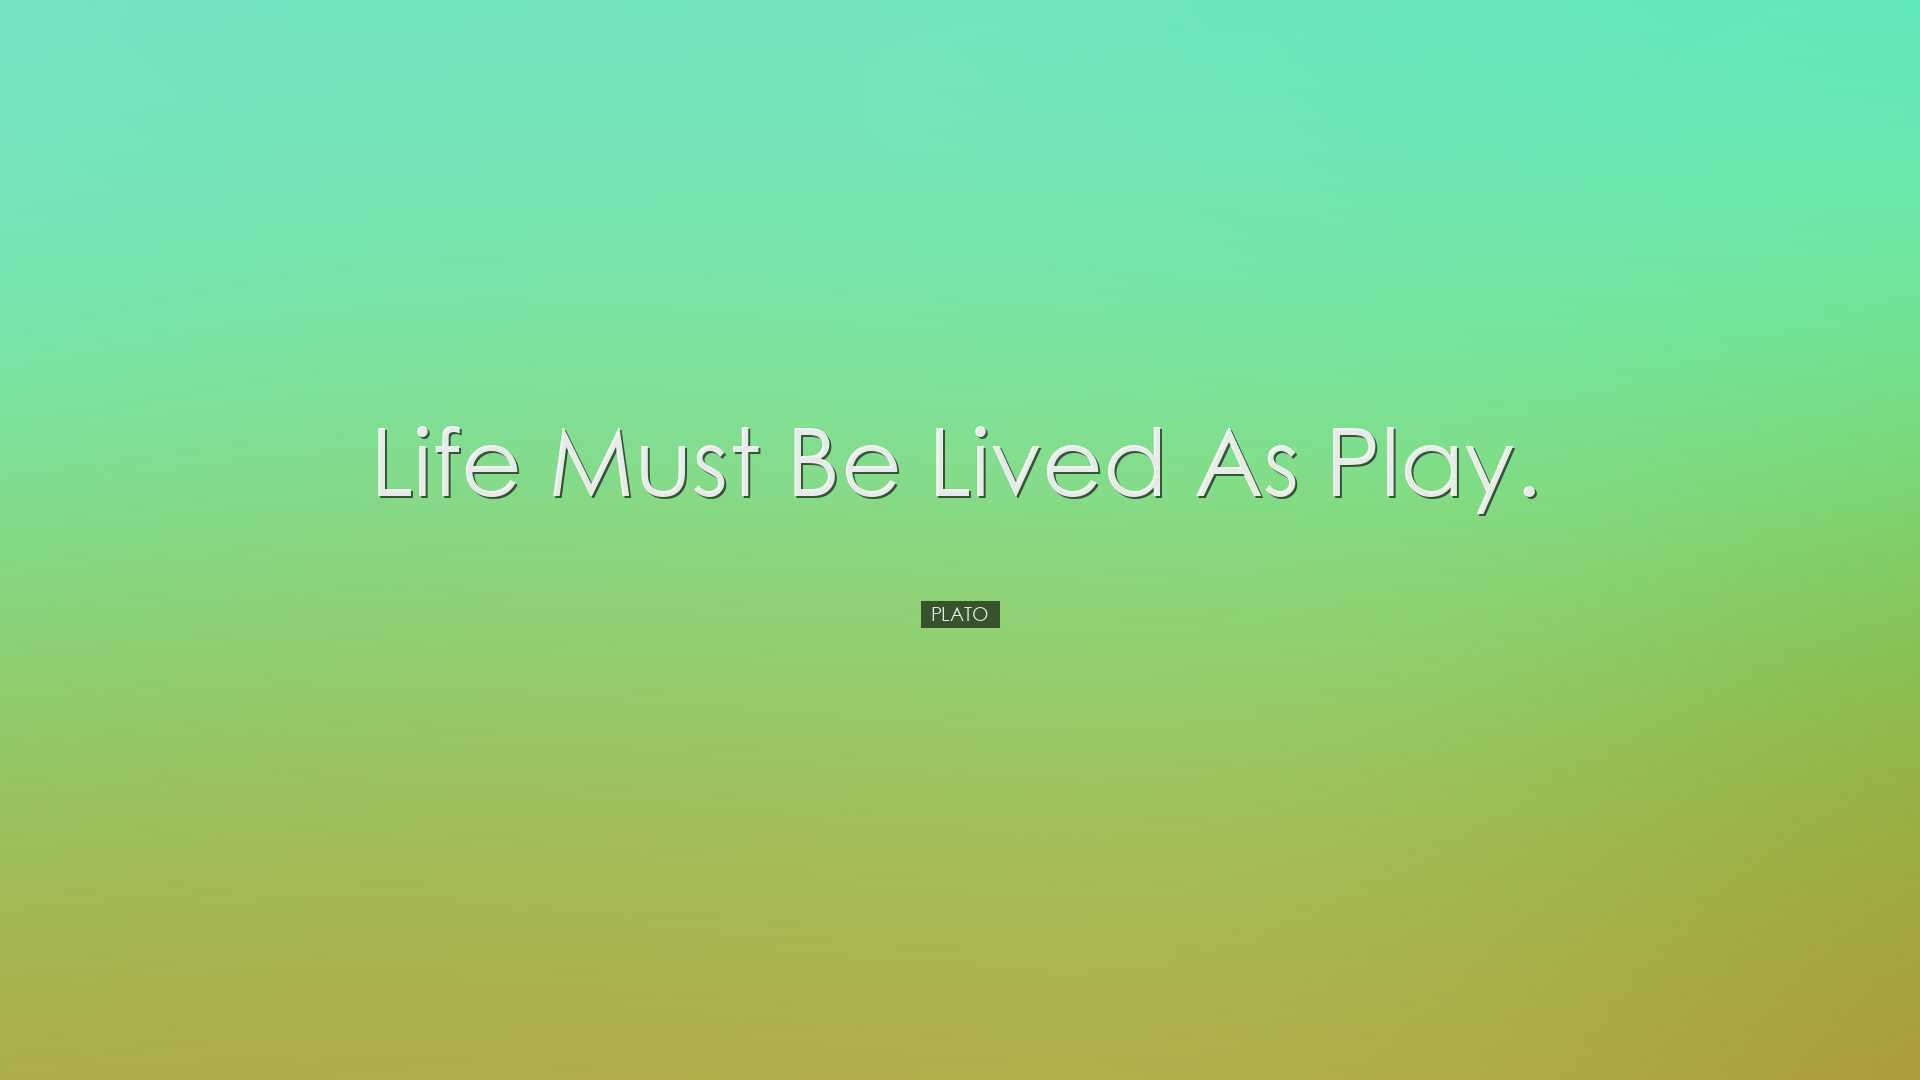 Life must be lived as play. - Plato